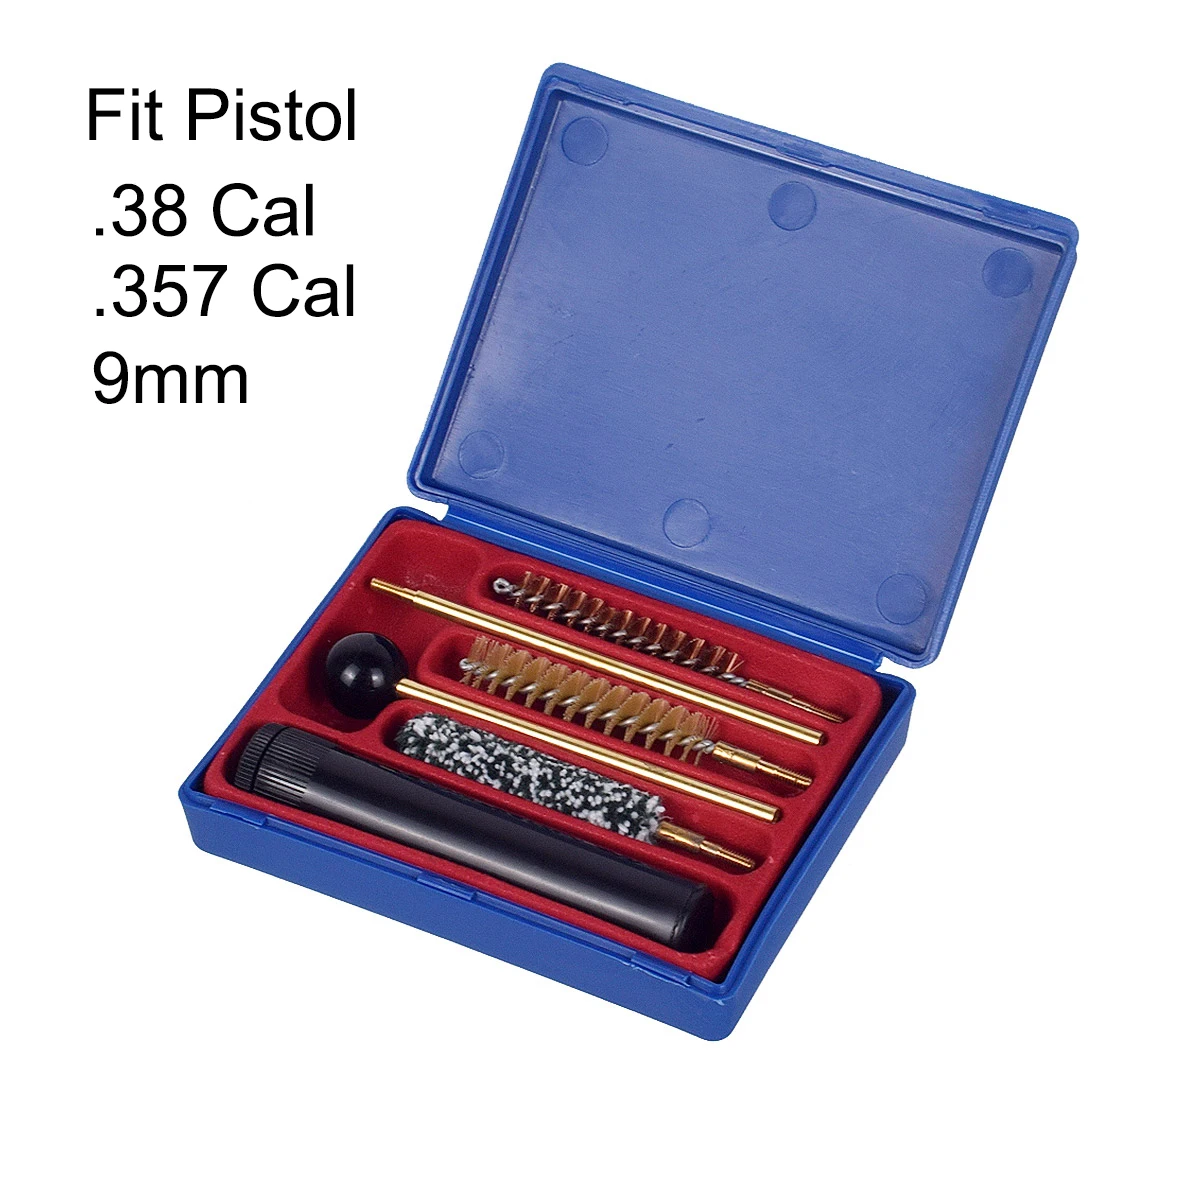 

Tactical Deluxe Universal Gun Cleaning Tool Kits With Durable Plastic Storage Case Brass Rods Brush Fit Pistol Cal.38/357/9mm